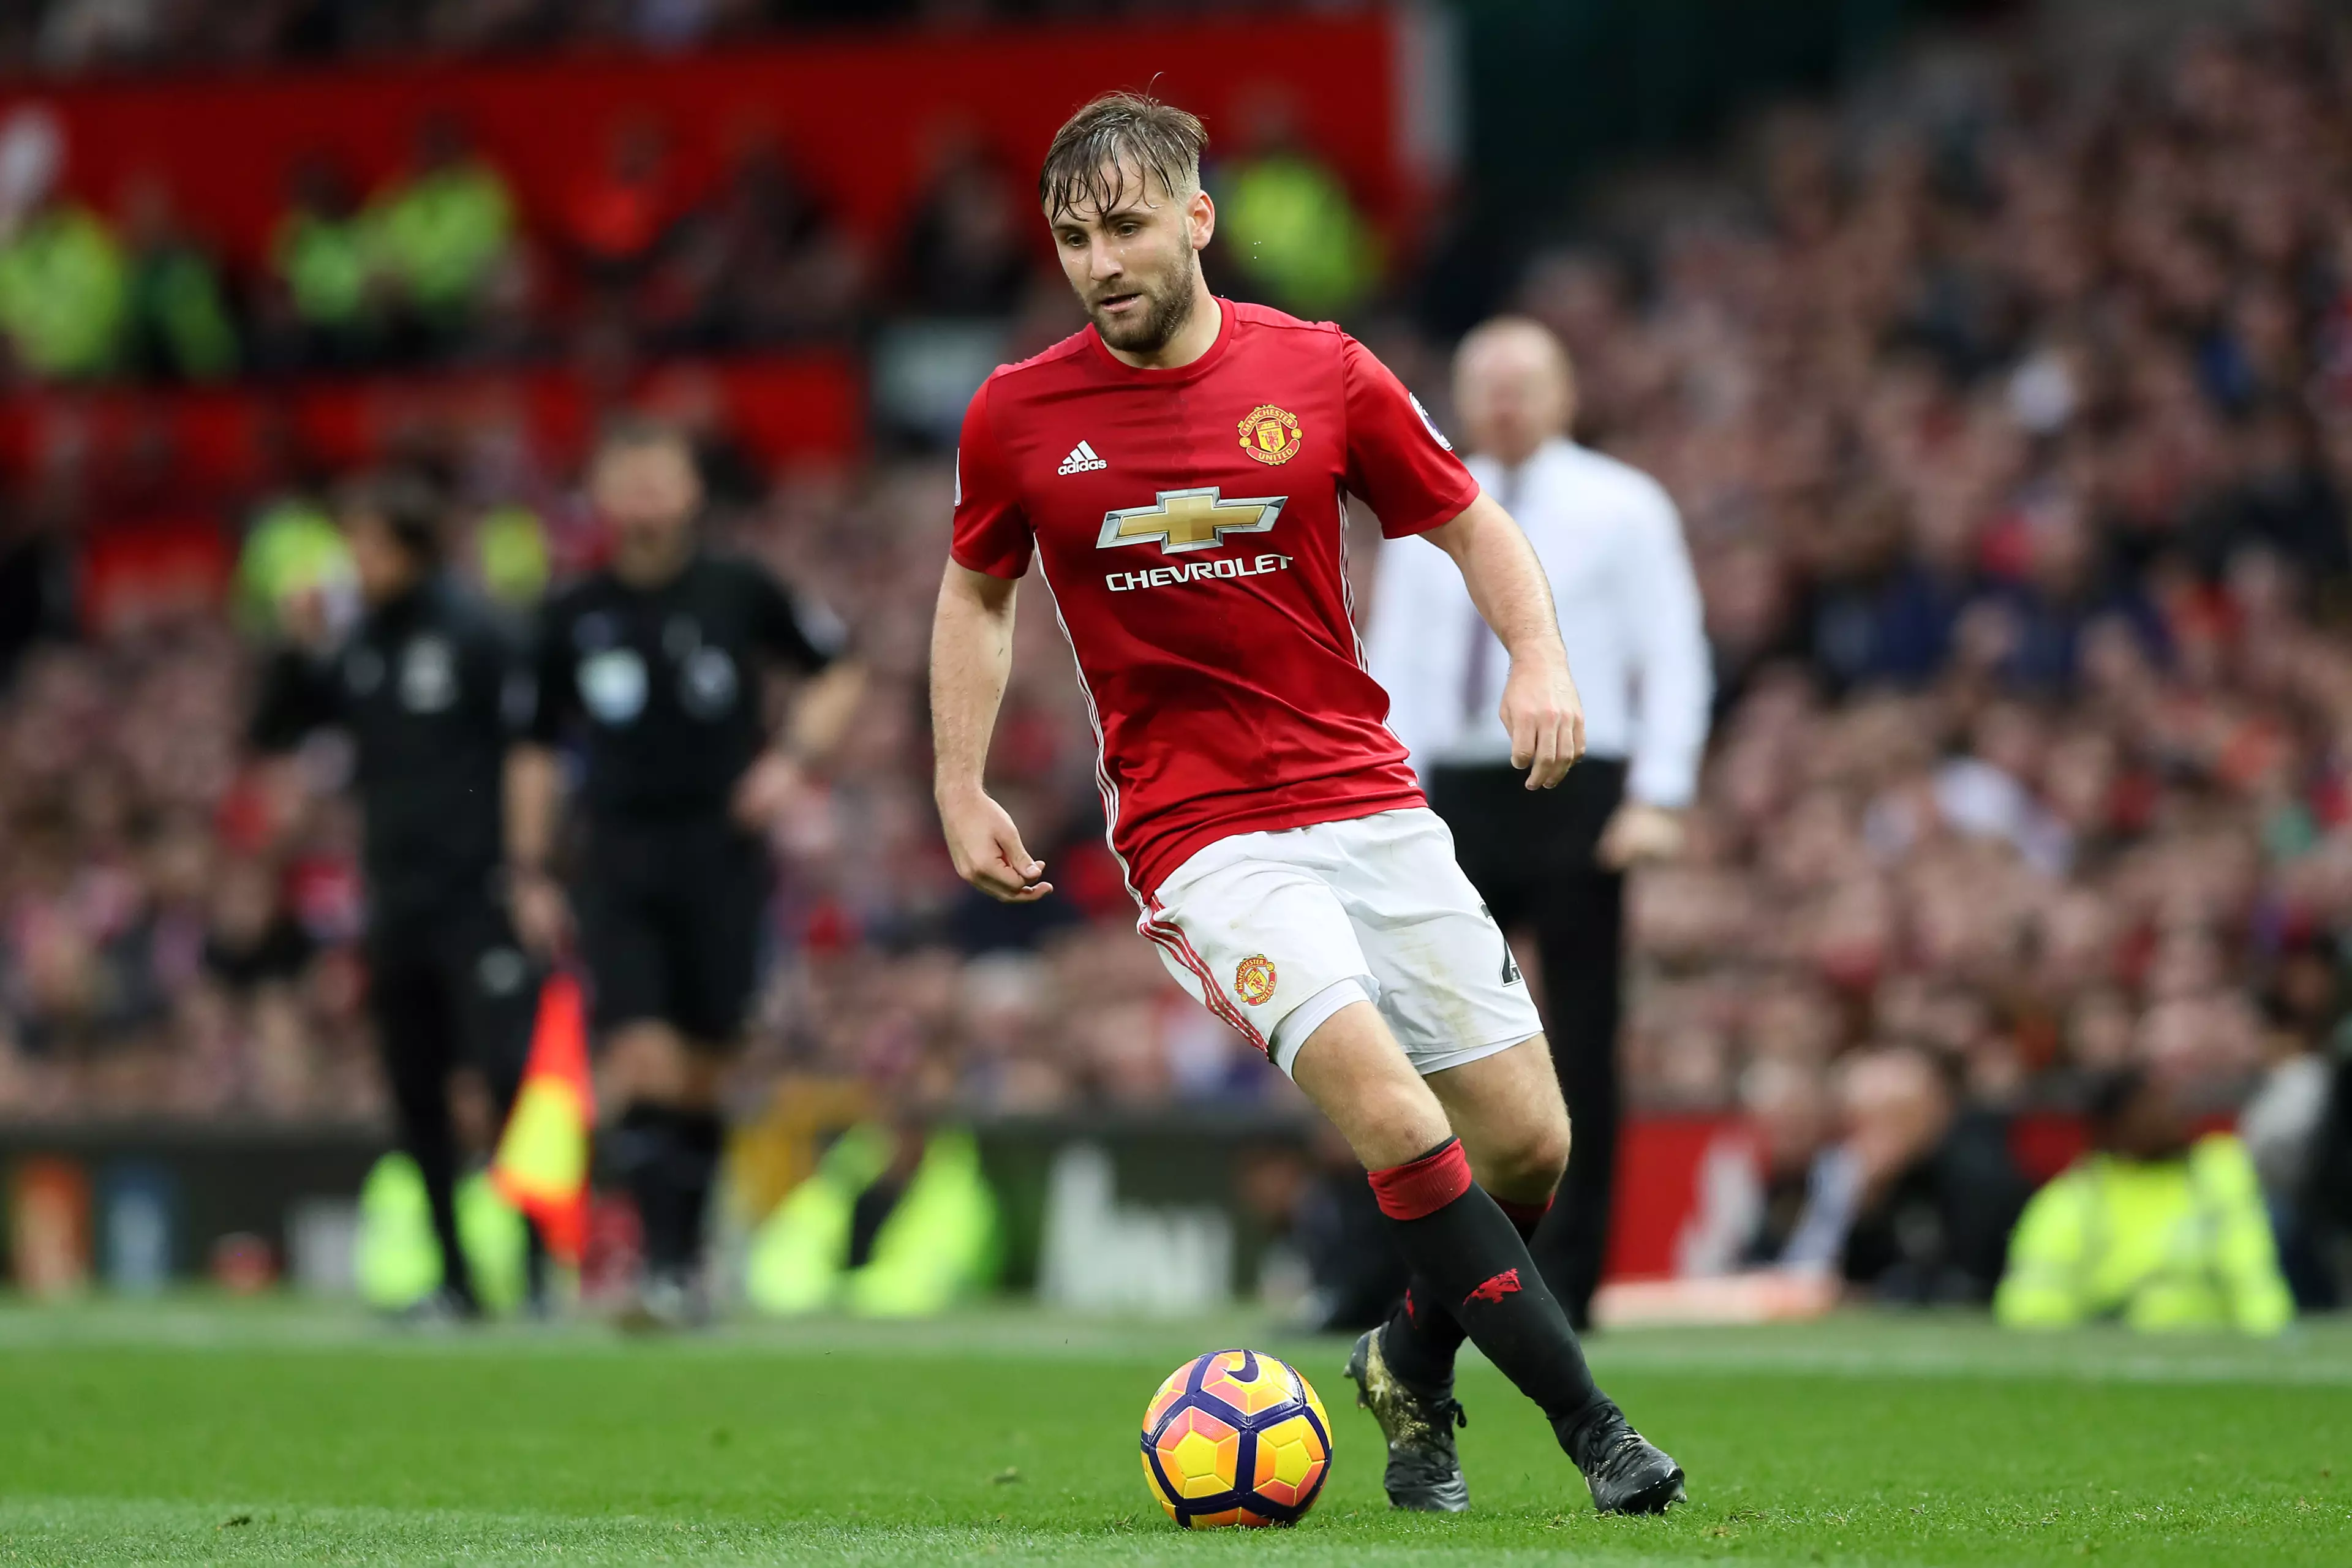 Luke Shaw Names A Surprising Player As His Toughest Opponent He's Faced 